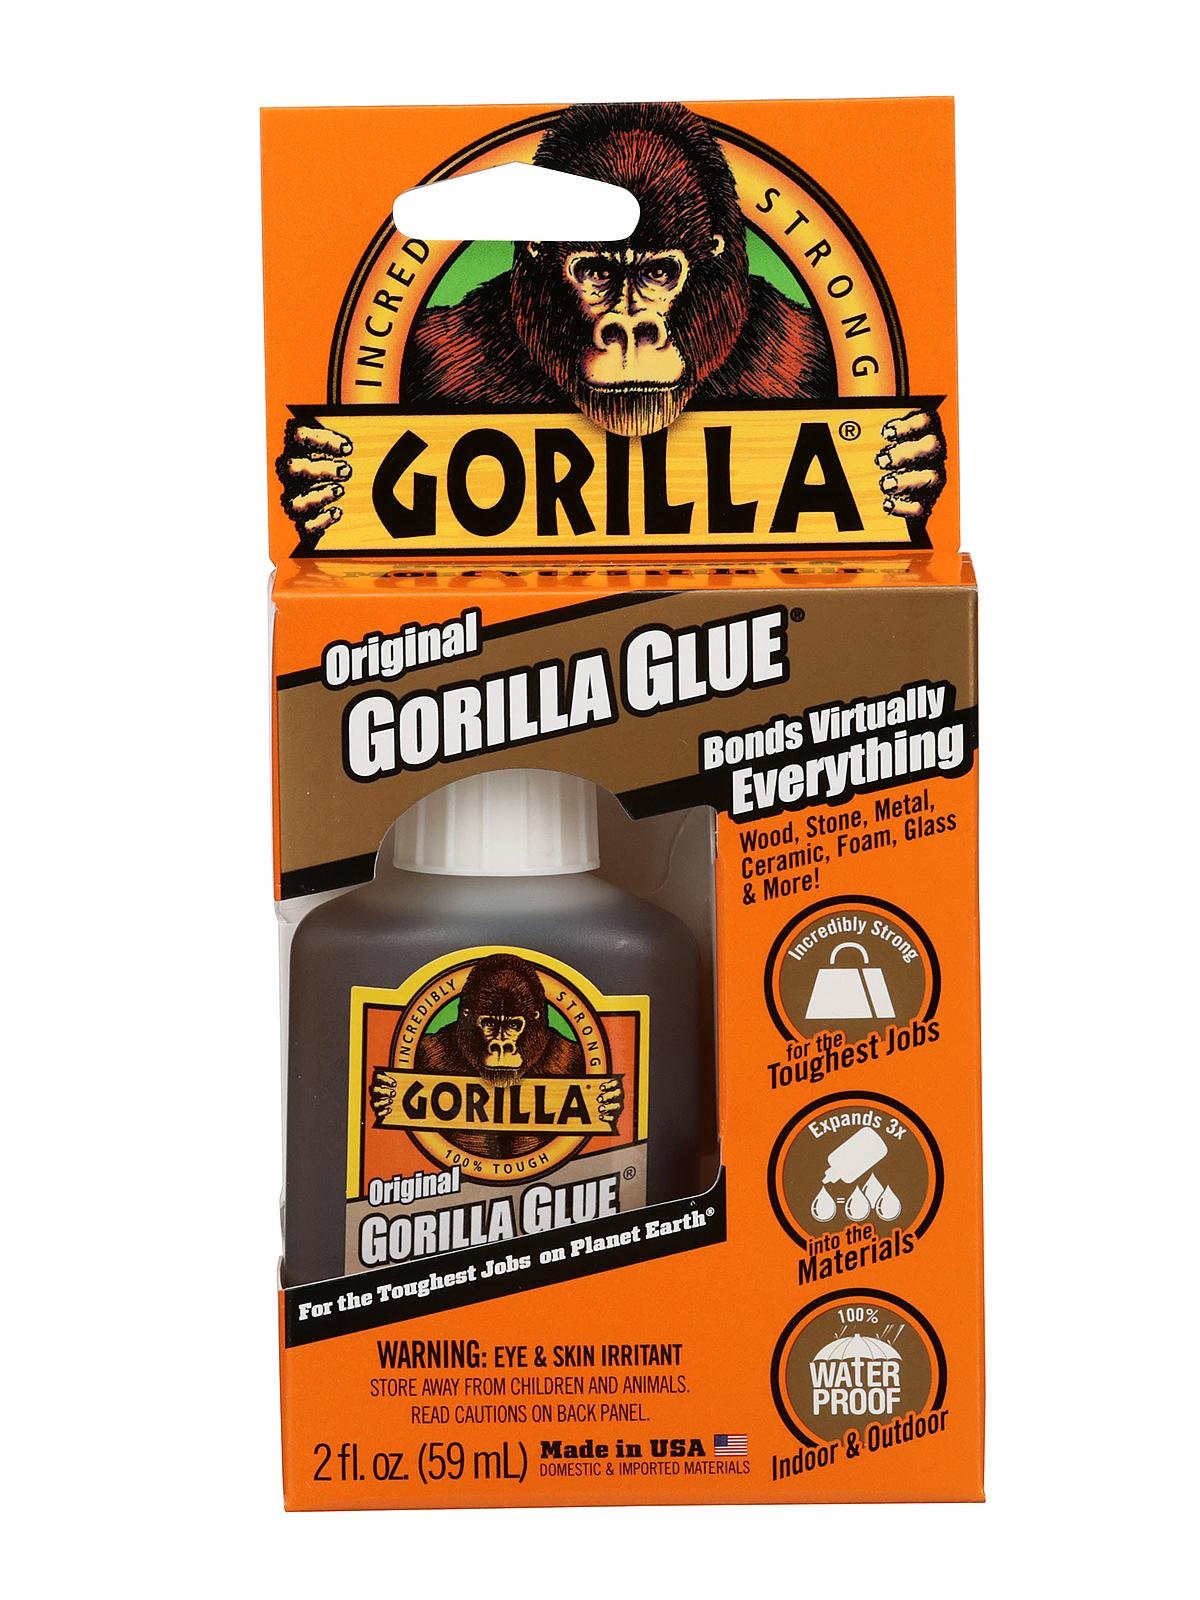 Can You Use Gorilla Glue For Patches? - Wayne Arthur Gallery